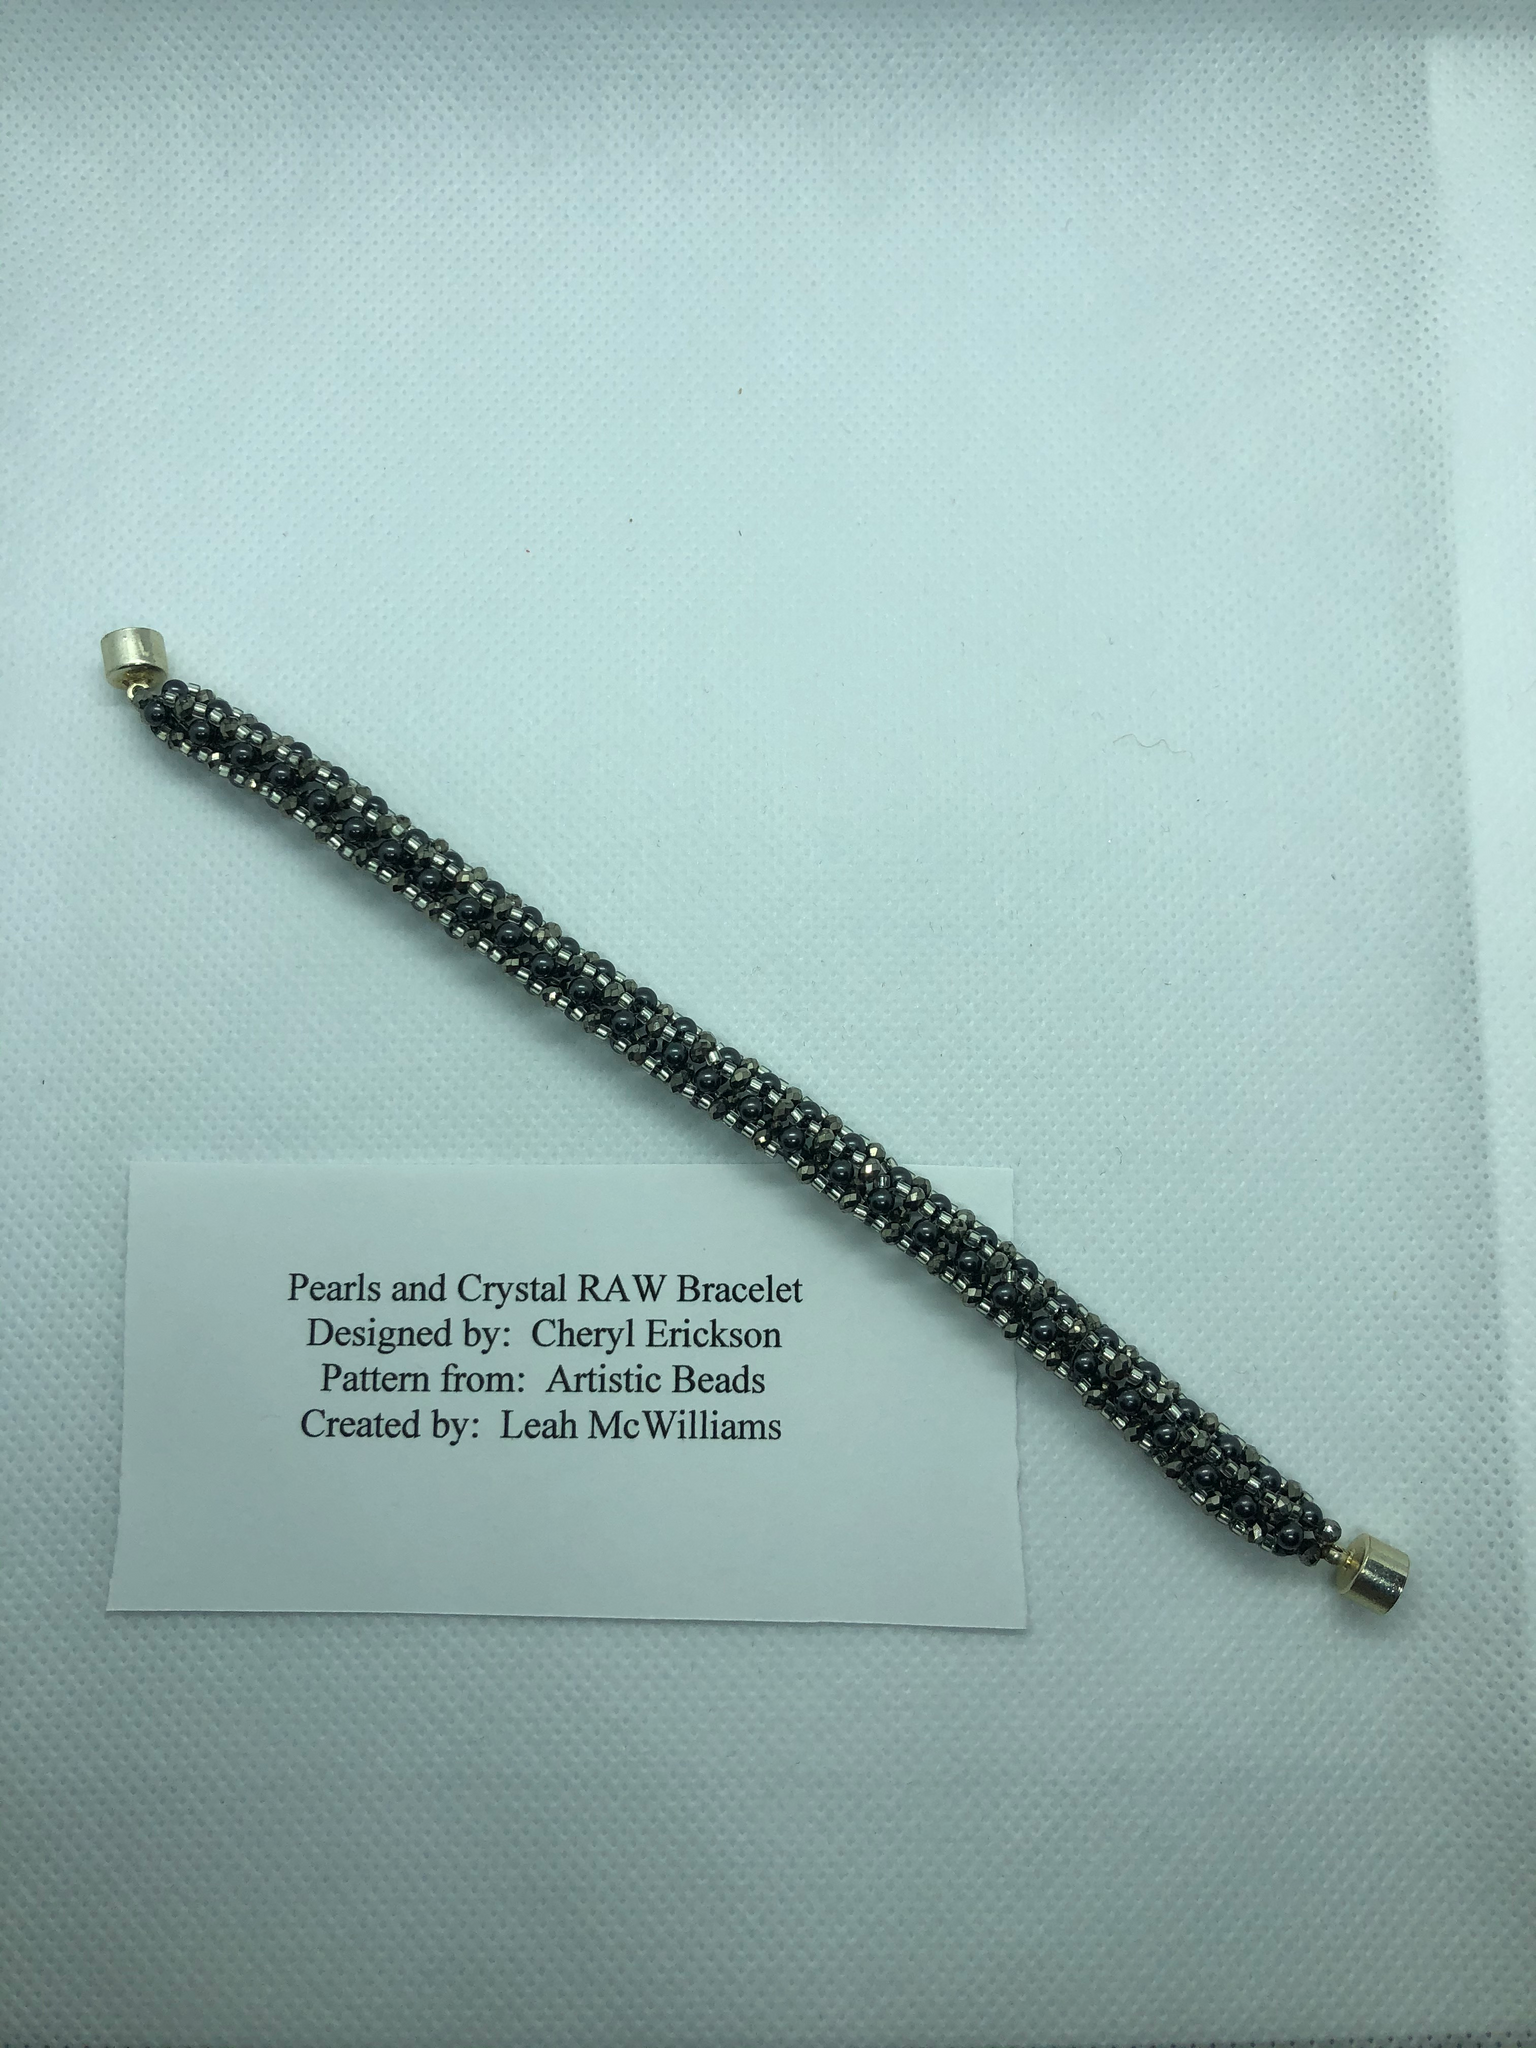 Pearls and Crystal RAW Bracelet